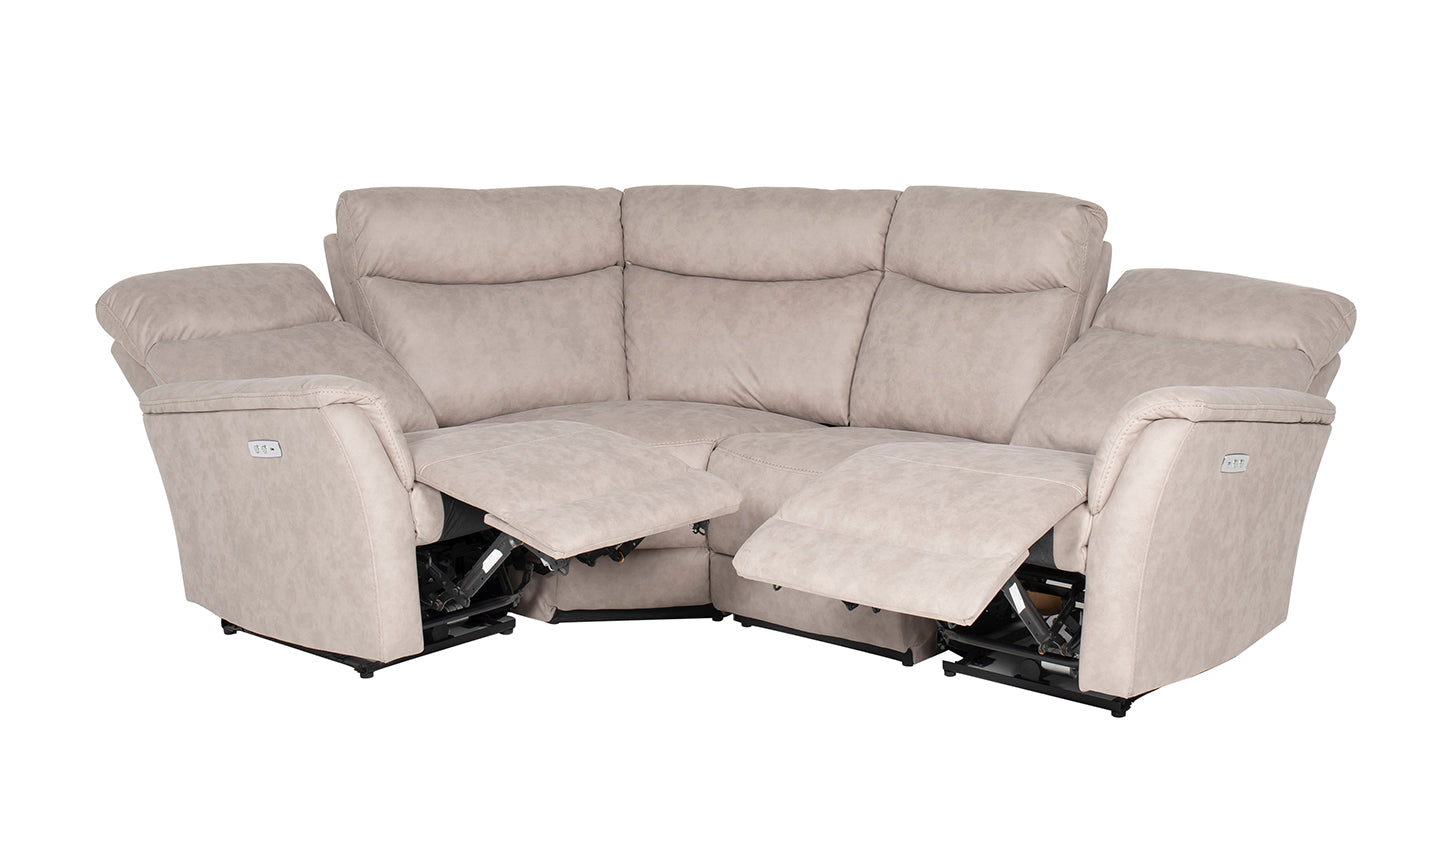 Mortimer Corner Group Electric Recliner - Taupe